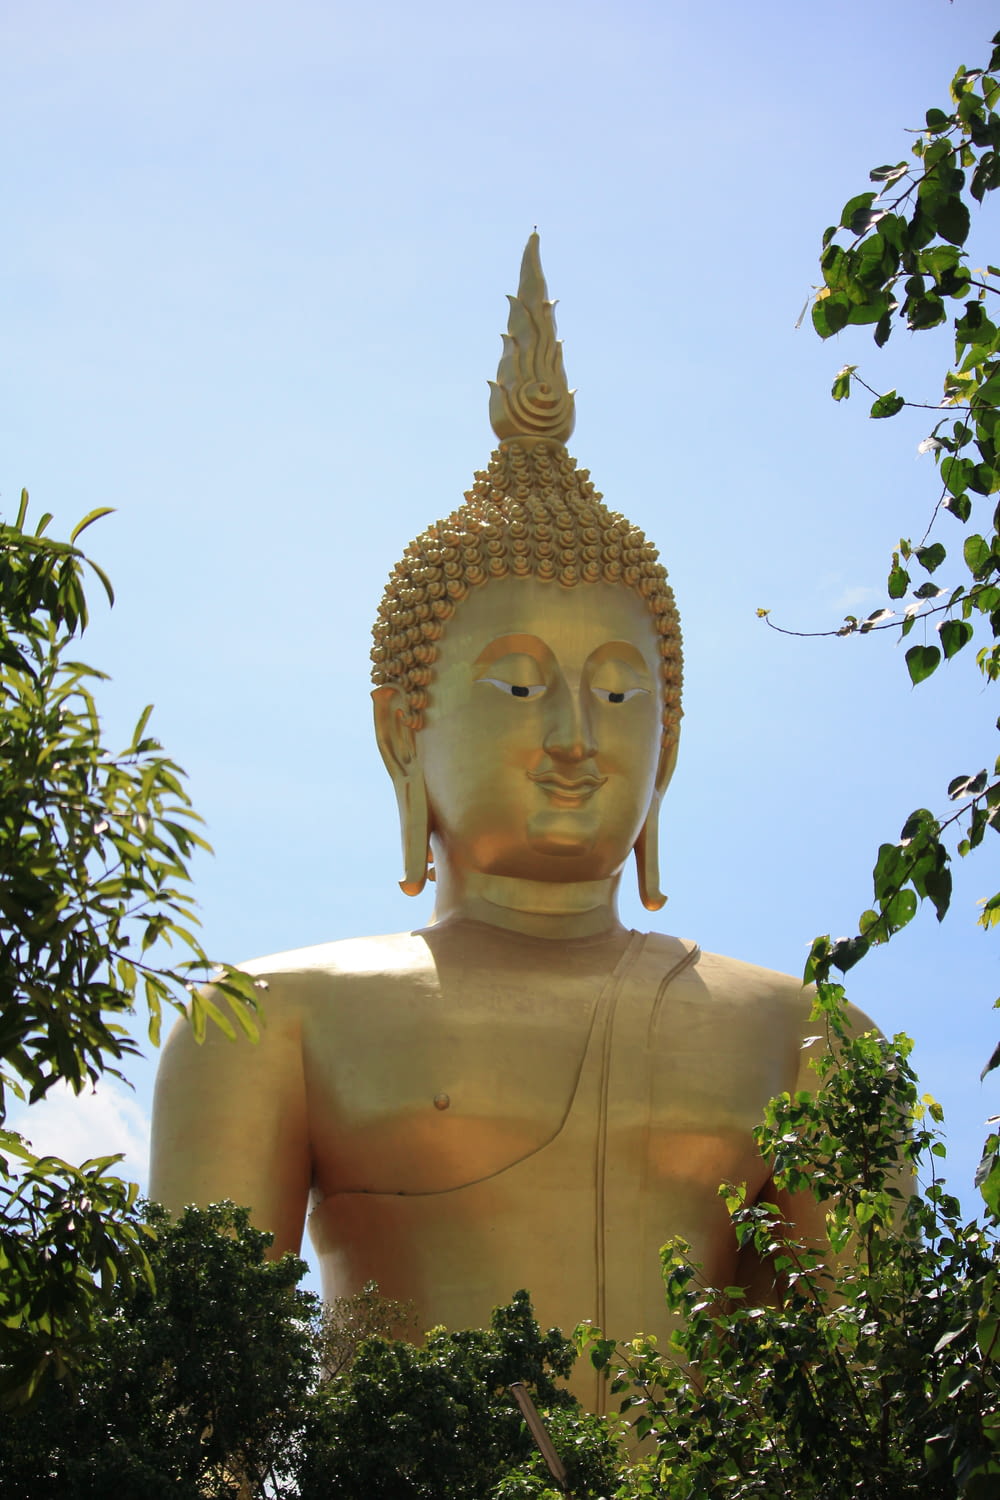 a large golden buddha statue sitting in the middle of a forest